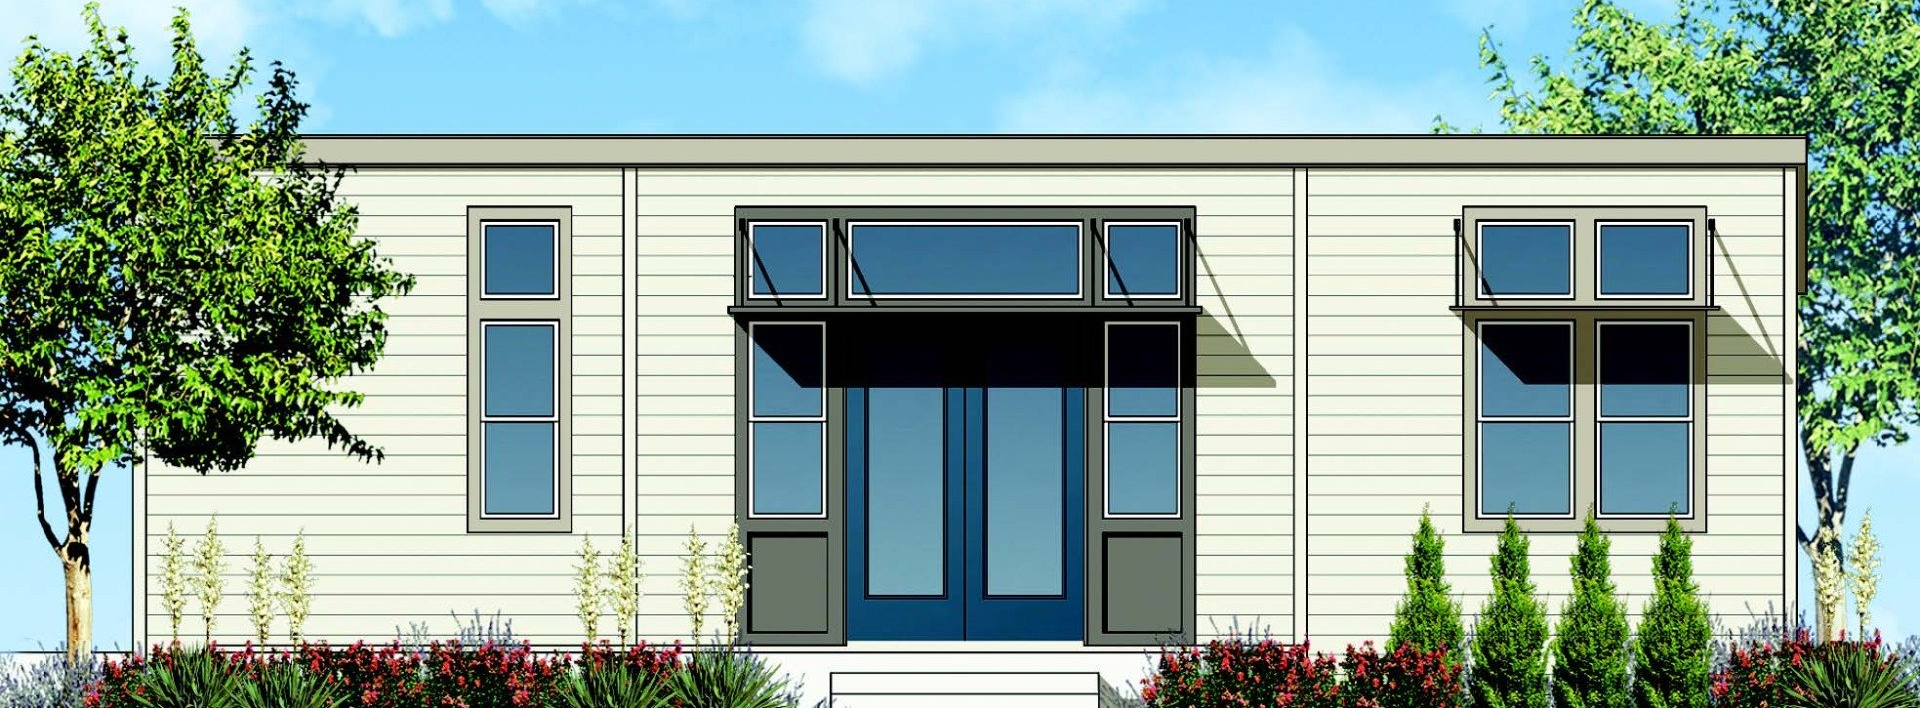 Accessory Dwelling Unit Front Elevation